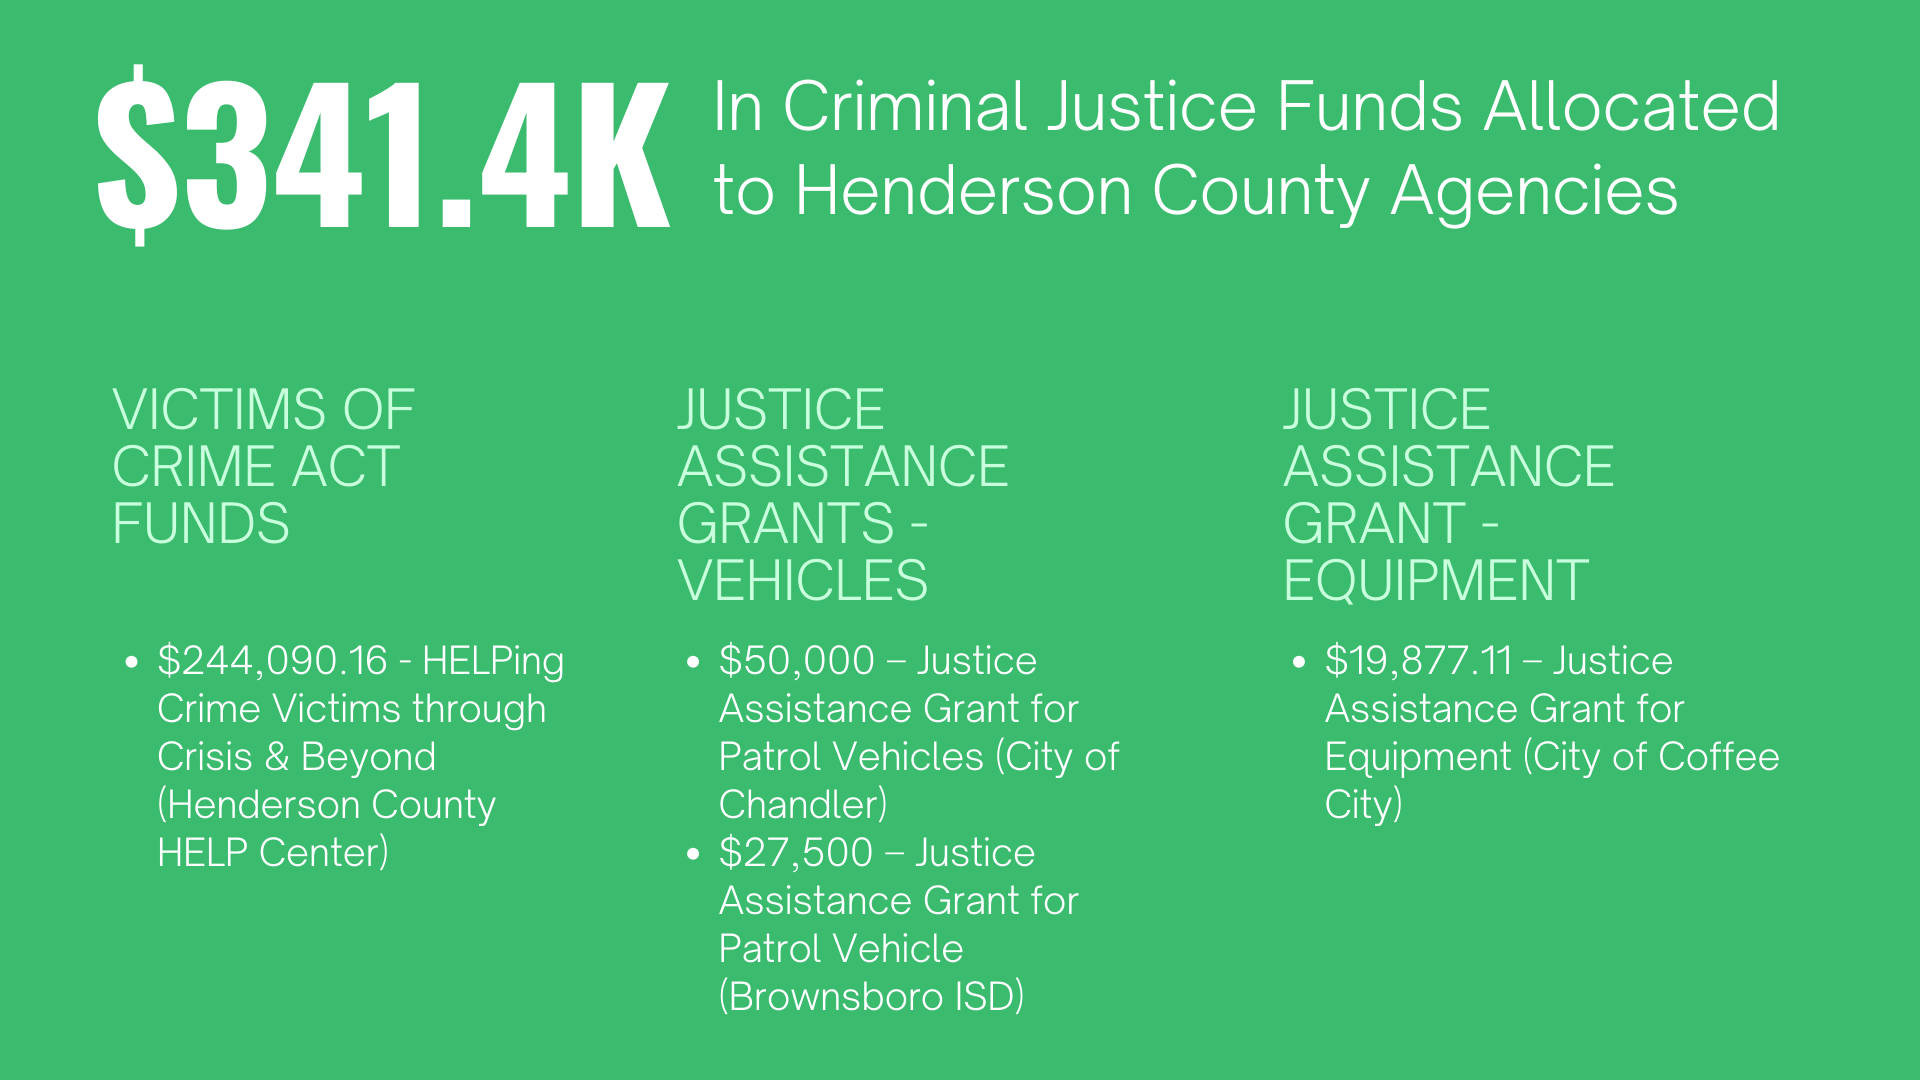 A green poster that says `` $ 341.4k in criminal justice funds allocated to henderson county agencies ''